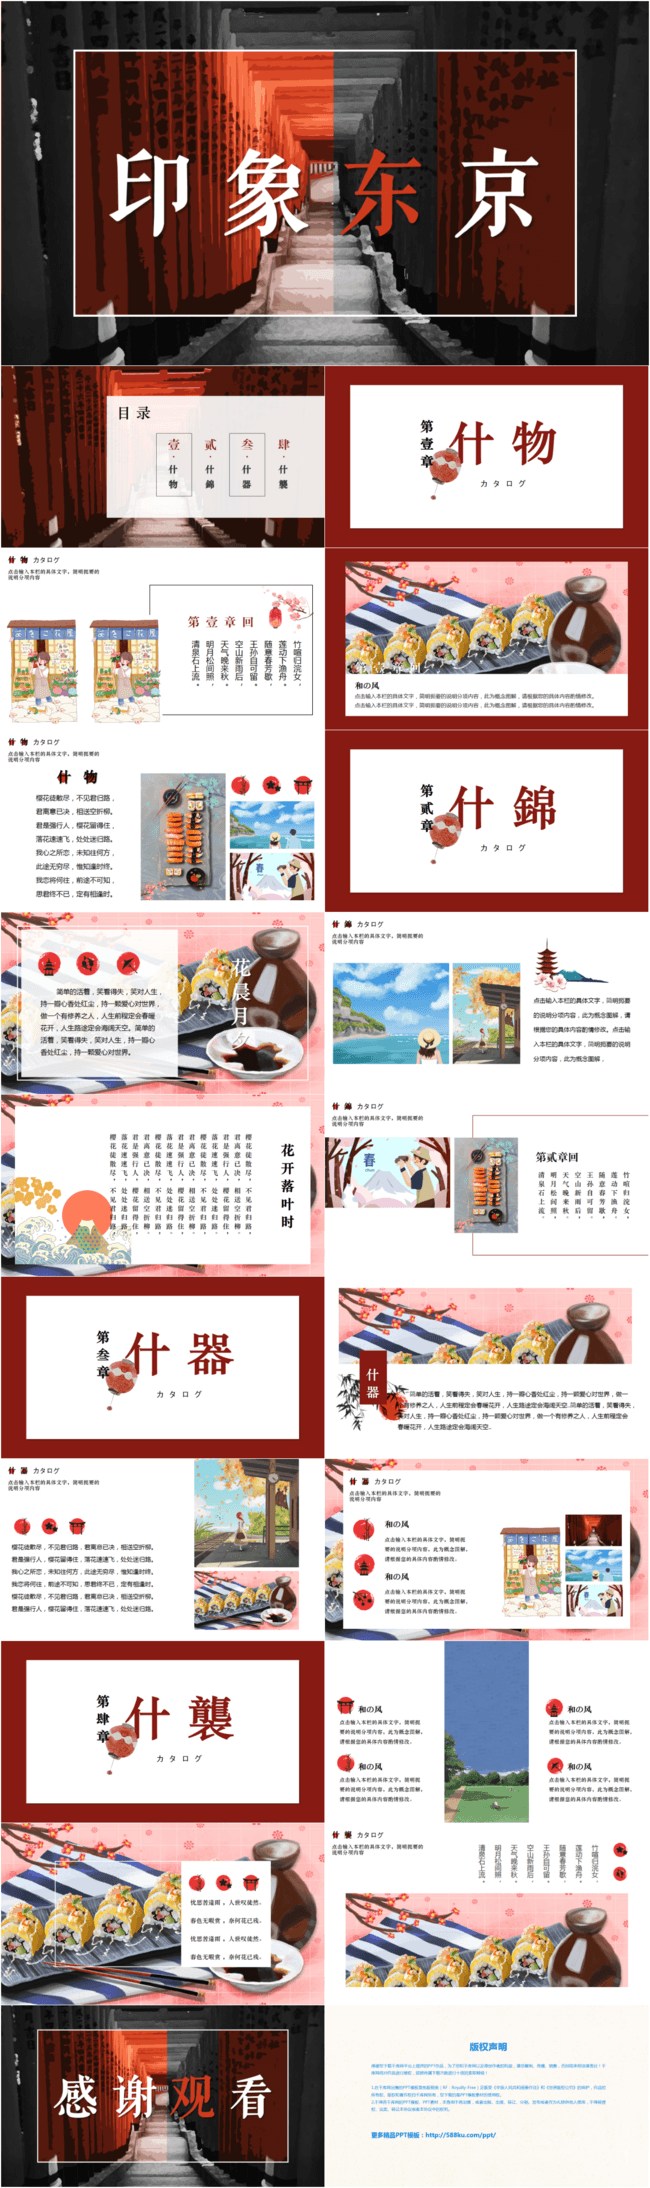 Japanese And Wind Impression Tokyo Travel Album Ppt Template Powerpoint Templete Ppt Free Download 650076172 Lovepik Com